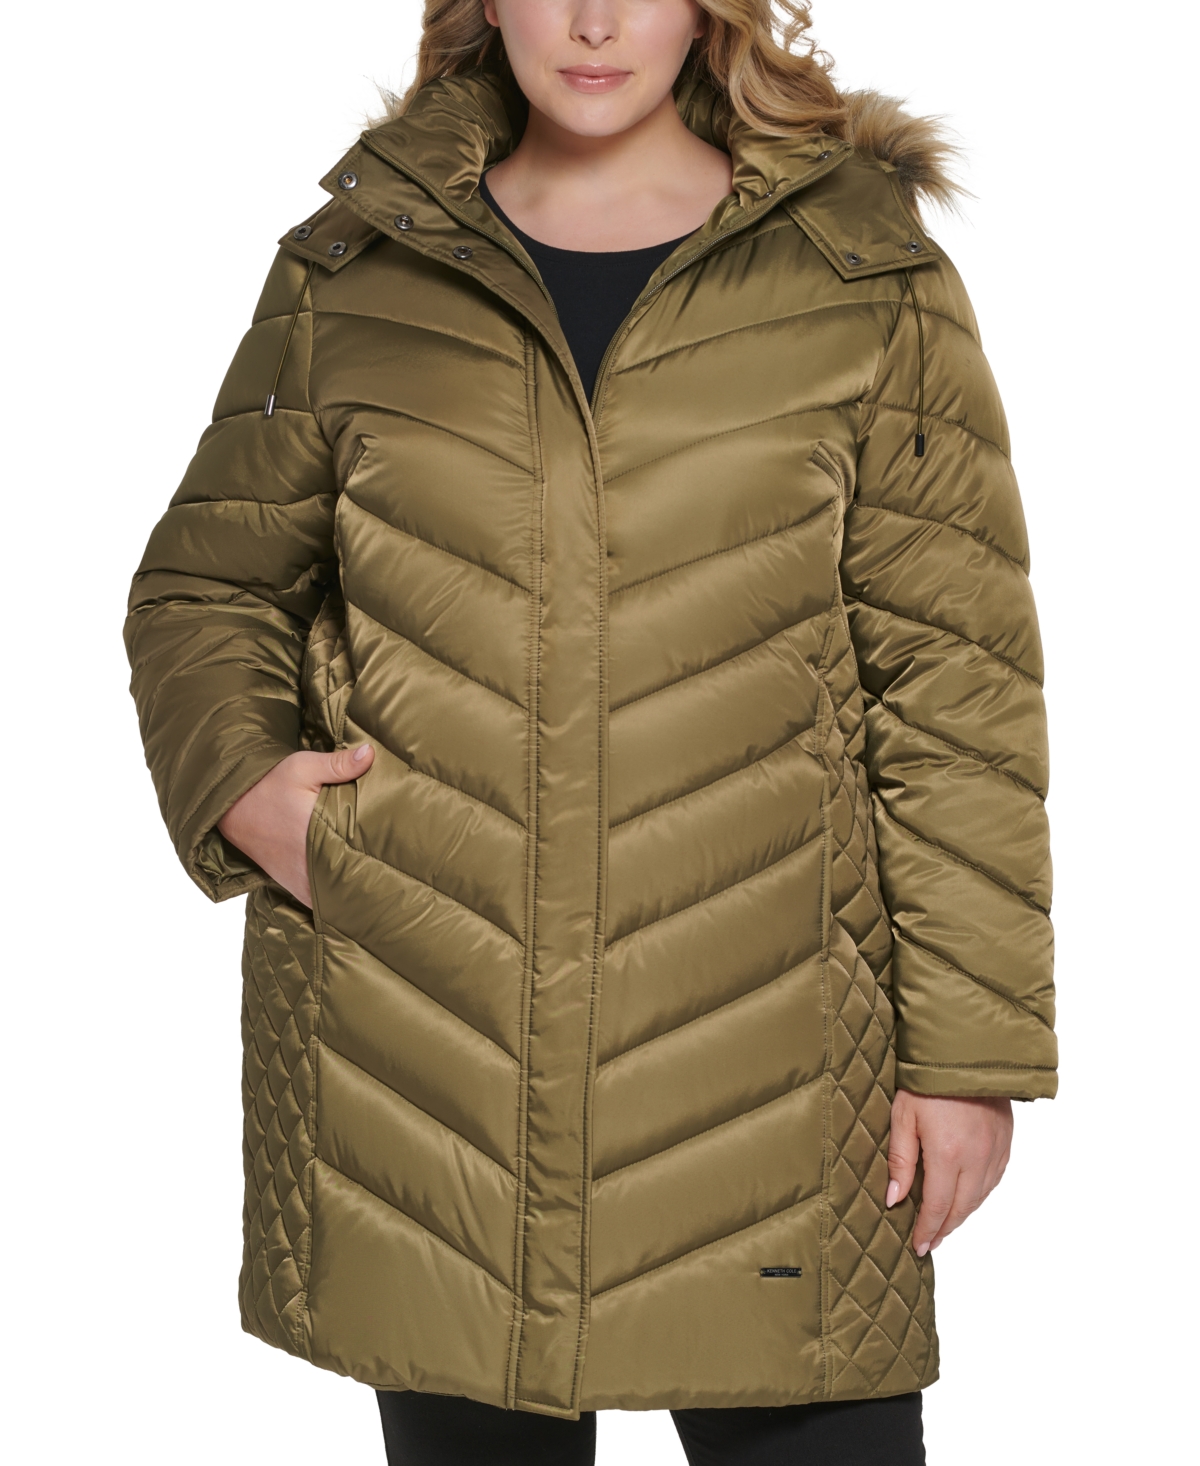 Kenneth Cole Women's Plus Size Faux-Fur-Trim Hooded Puffer Coat, Created for Macy's